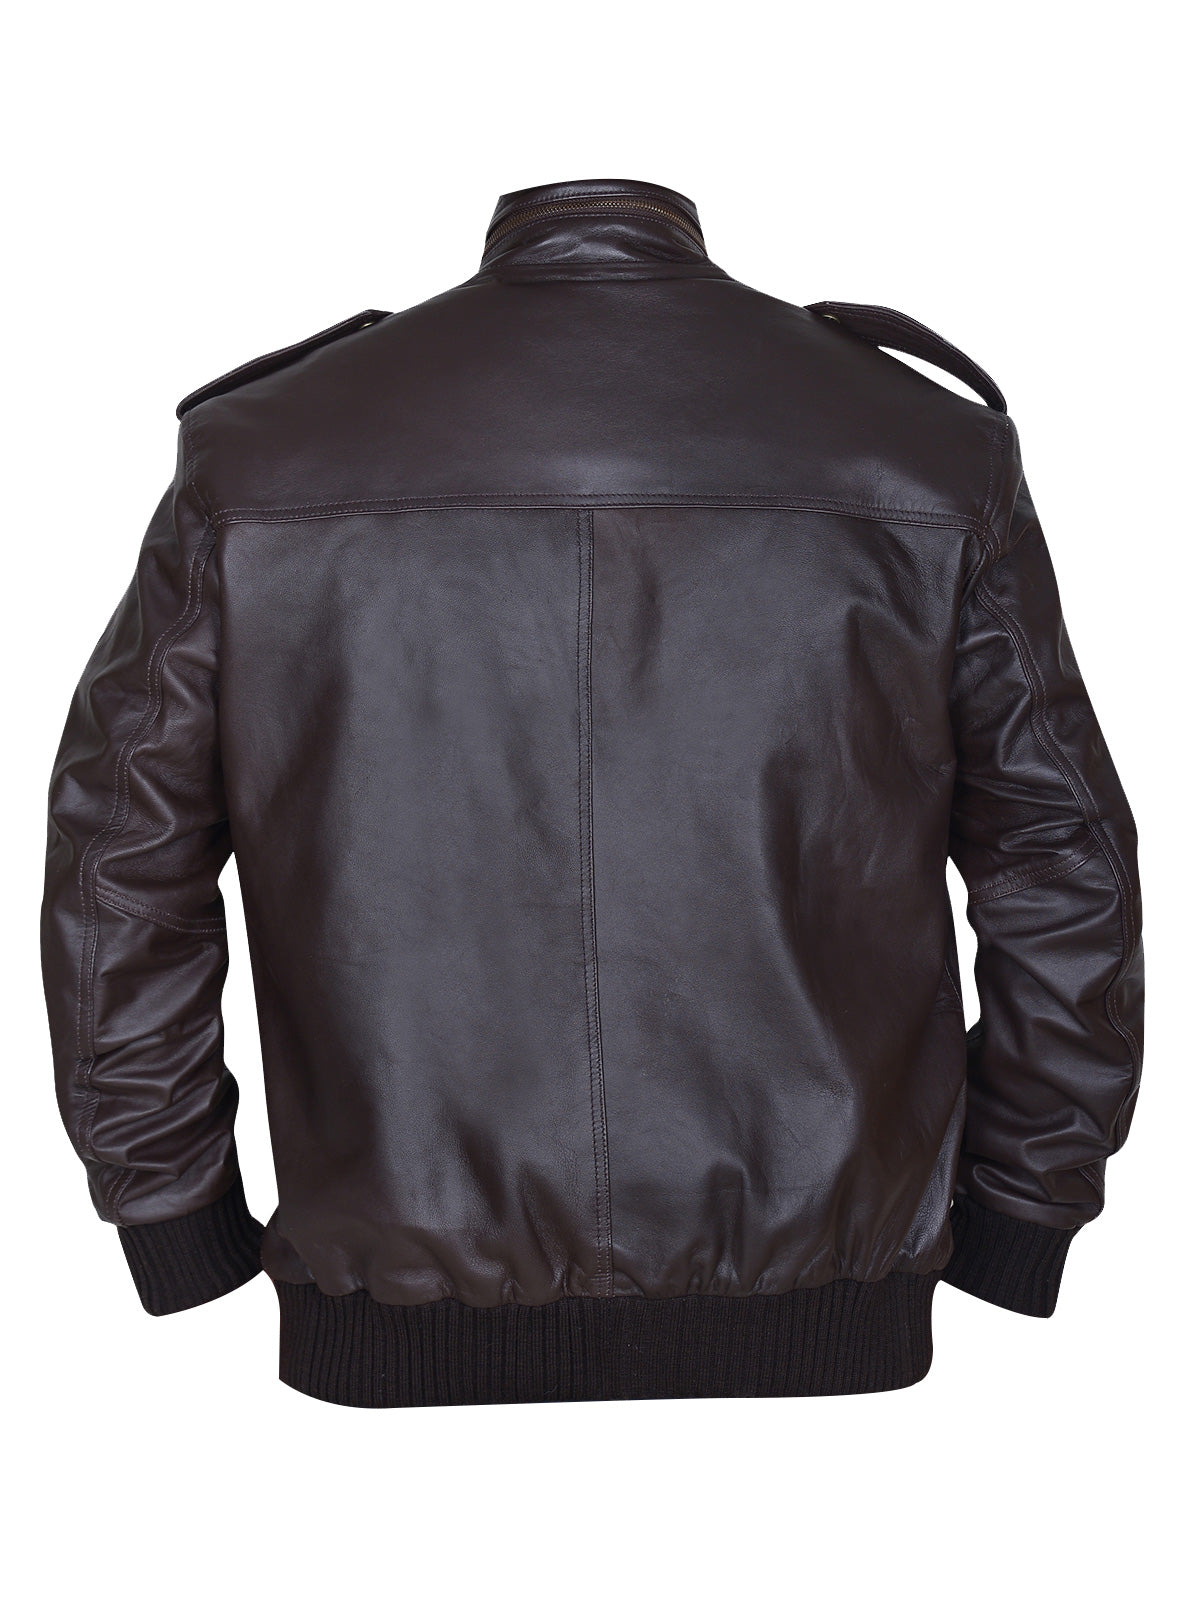 Men's Gorgeous Brown Cowhide Leather Bomber Jacket